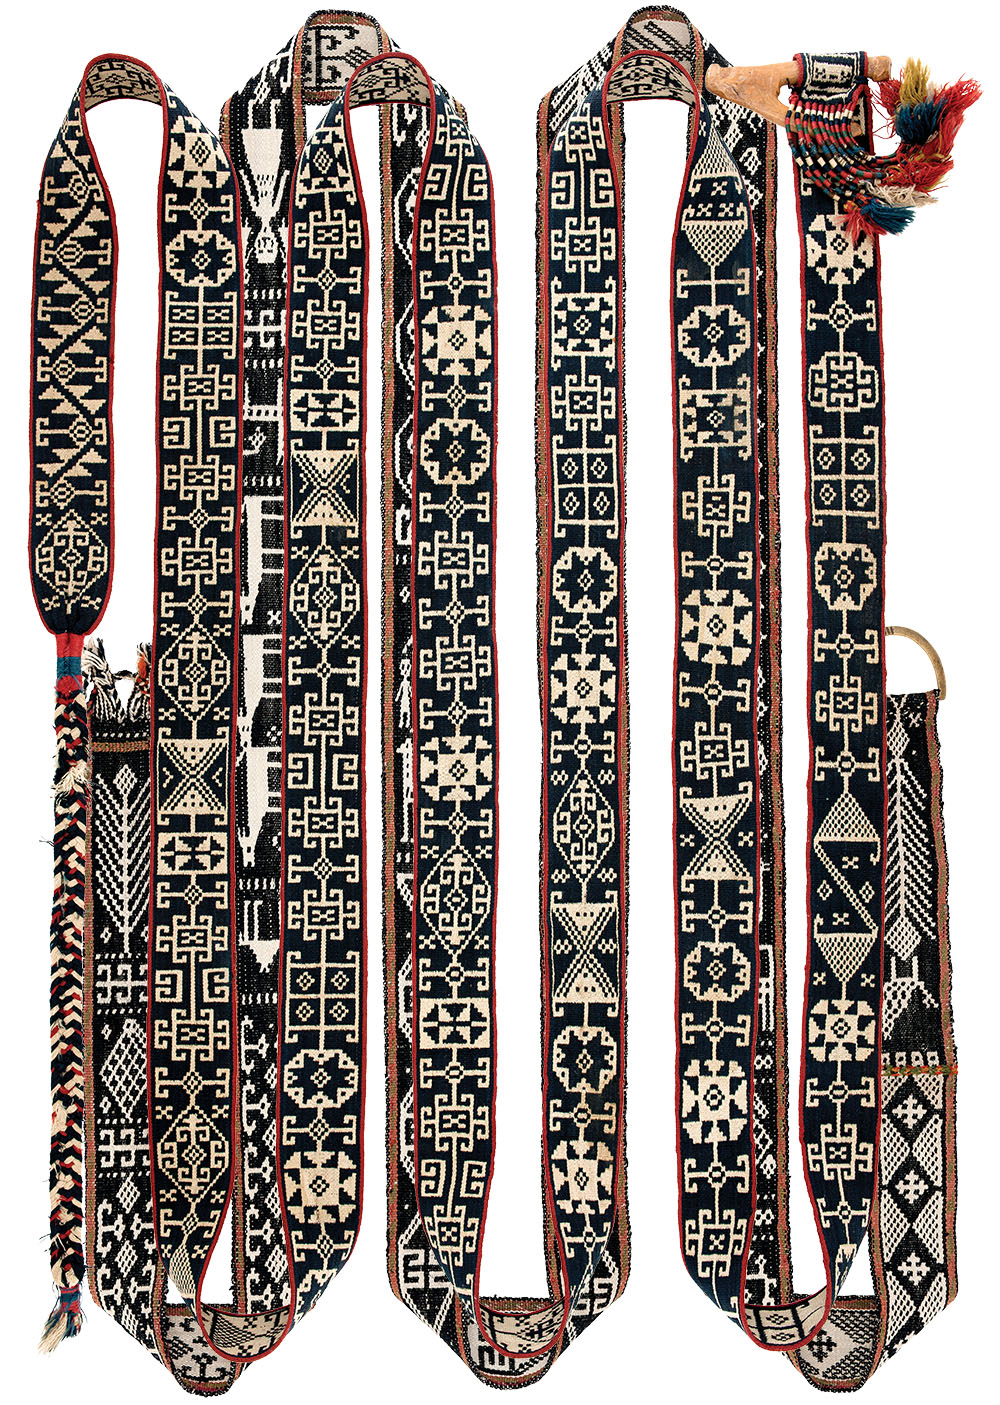 Shahsevan pack-animal band, Iran. Fred Mushkat collection. Published in Weavings of Nomads in Iran, no.86